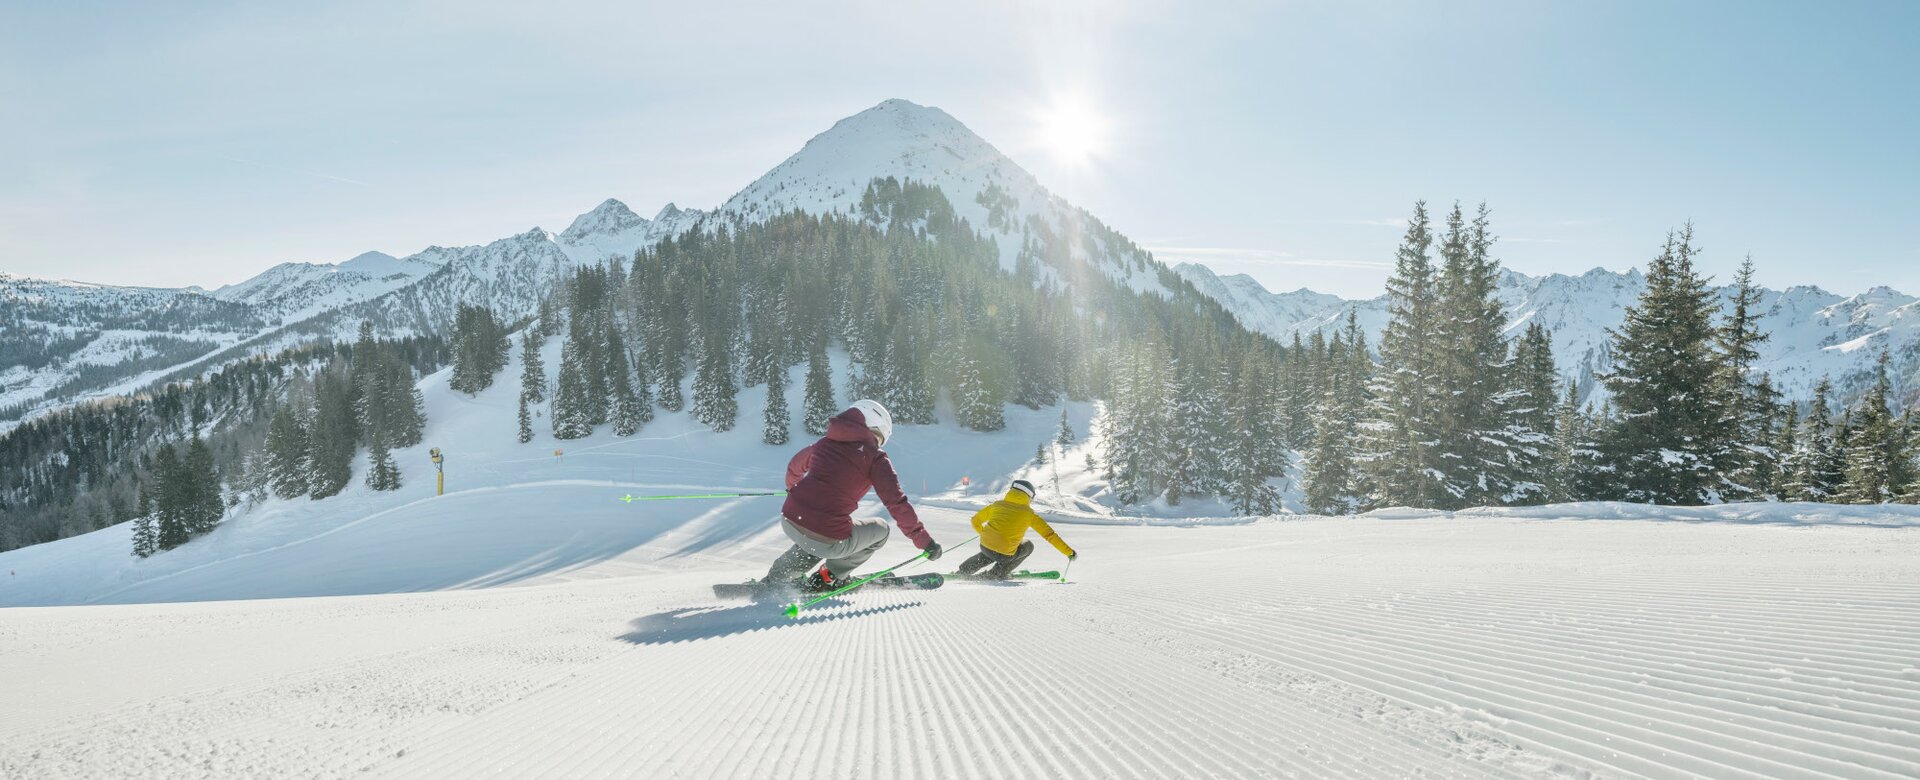 Two skiers ski down the freshly groomed slope and snow-covered mountains can be seen | © Peter Burgstaller